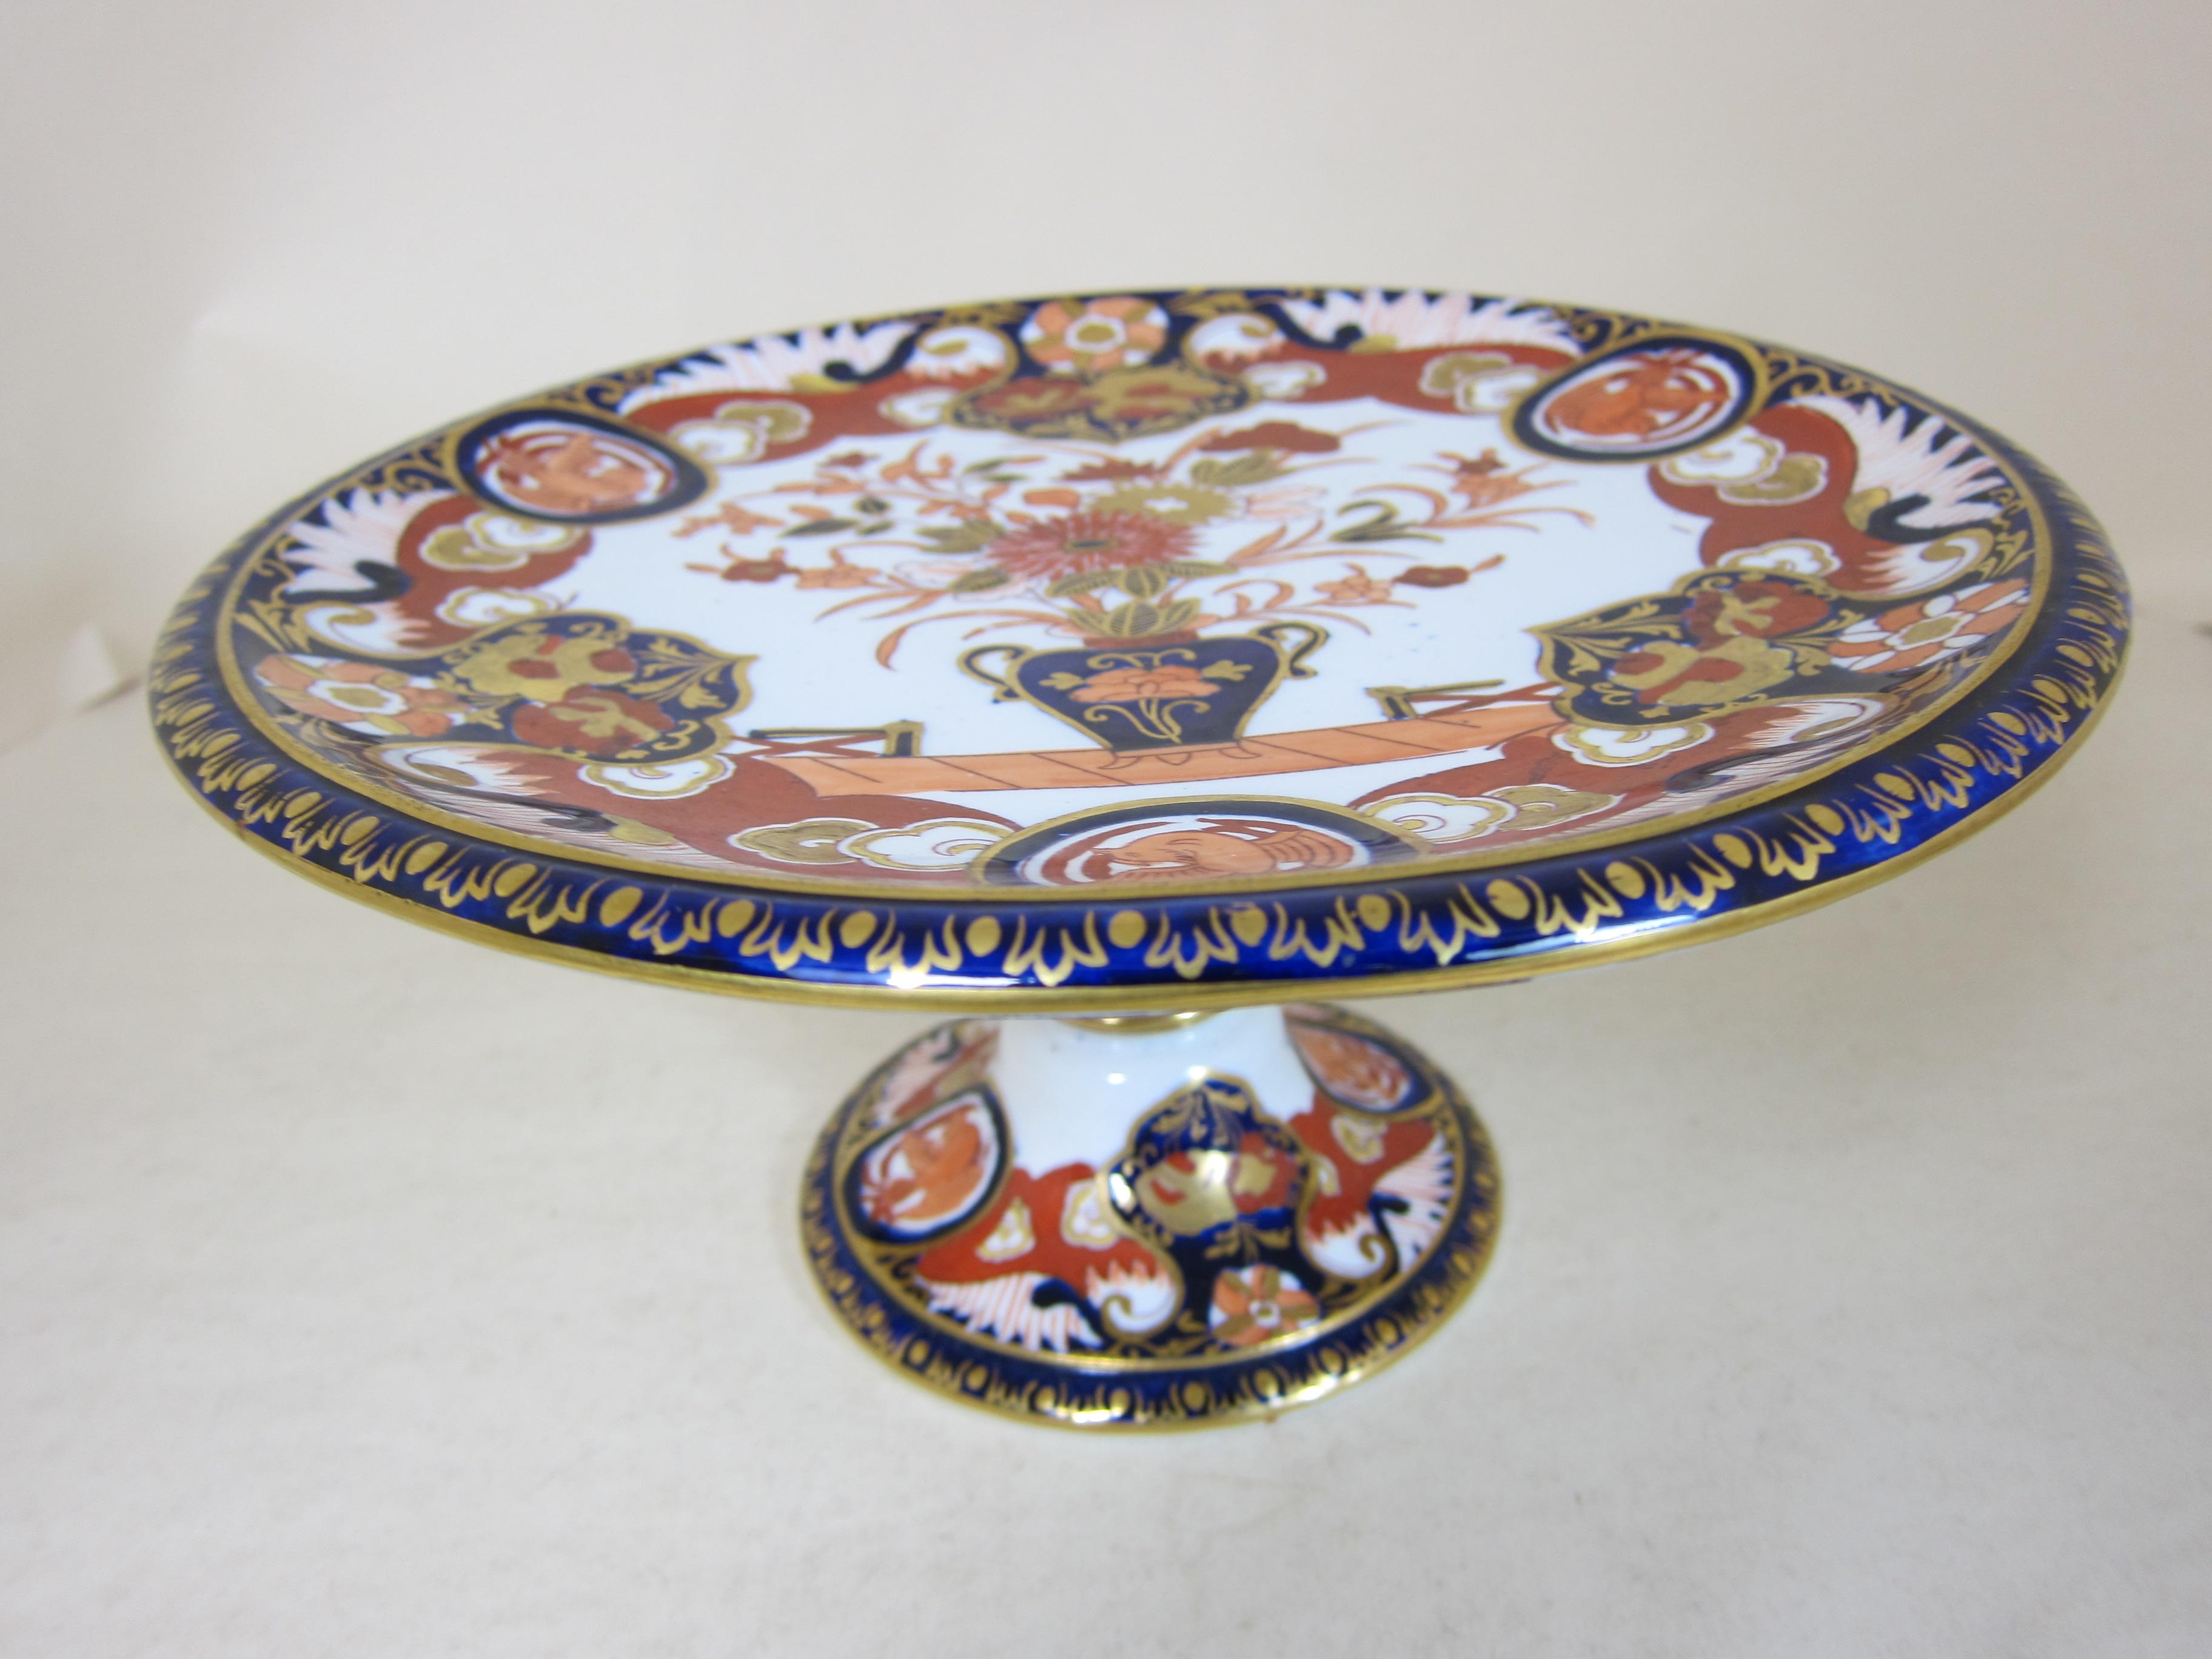 An Ashworths real ironstone dessert service decorated in Imari colours with a large vase with flowers.